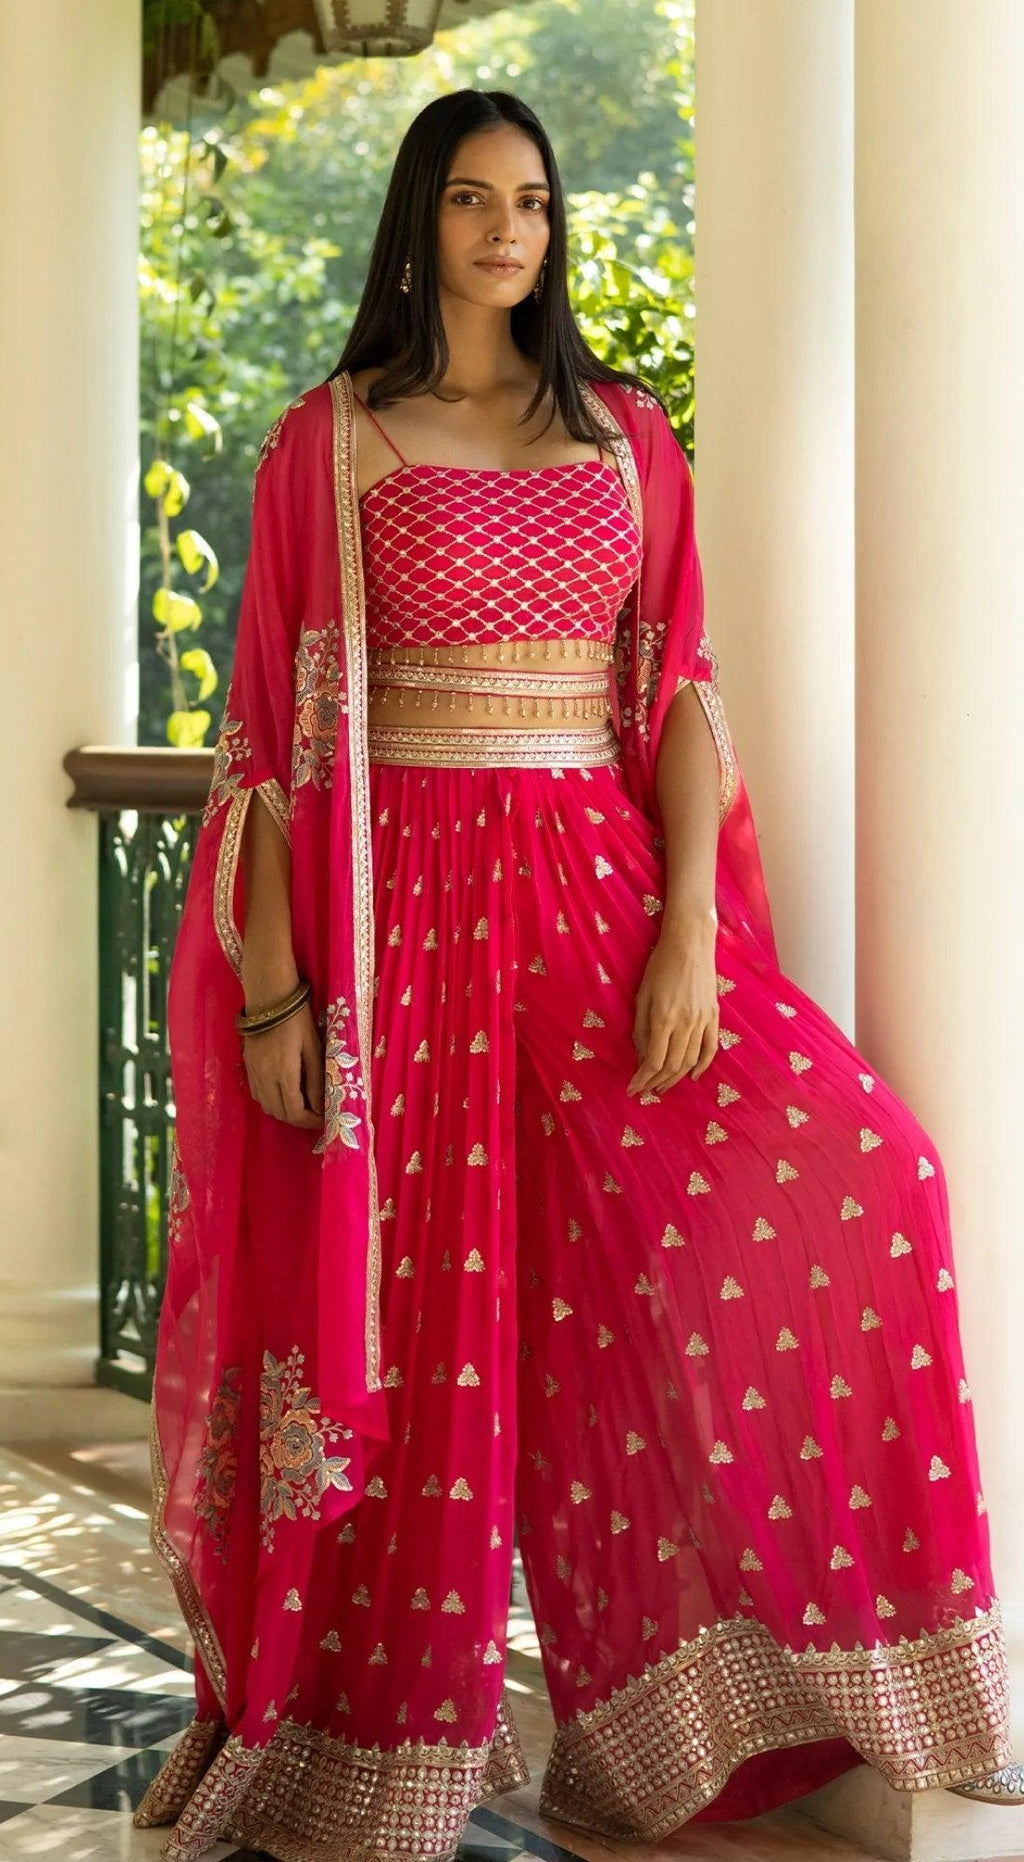 fuscia pink palazzo set with bustier and floral motif cepe - Basanti Kapde aur Koffee